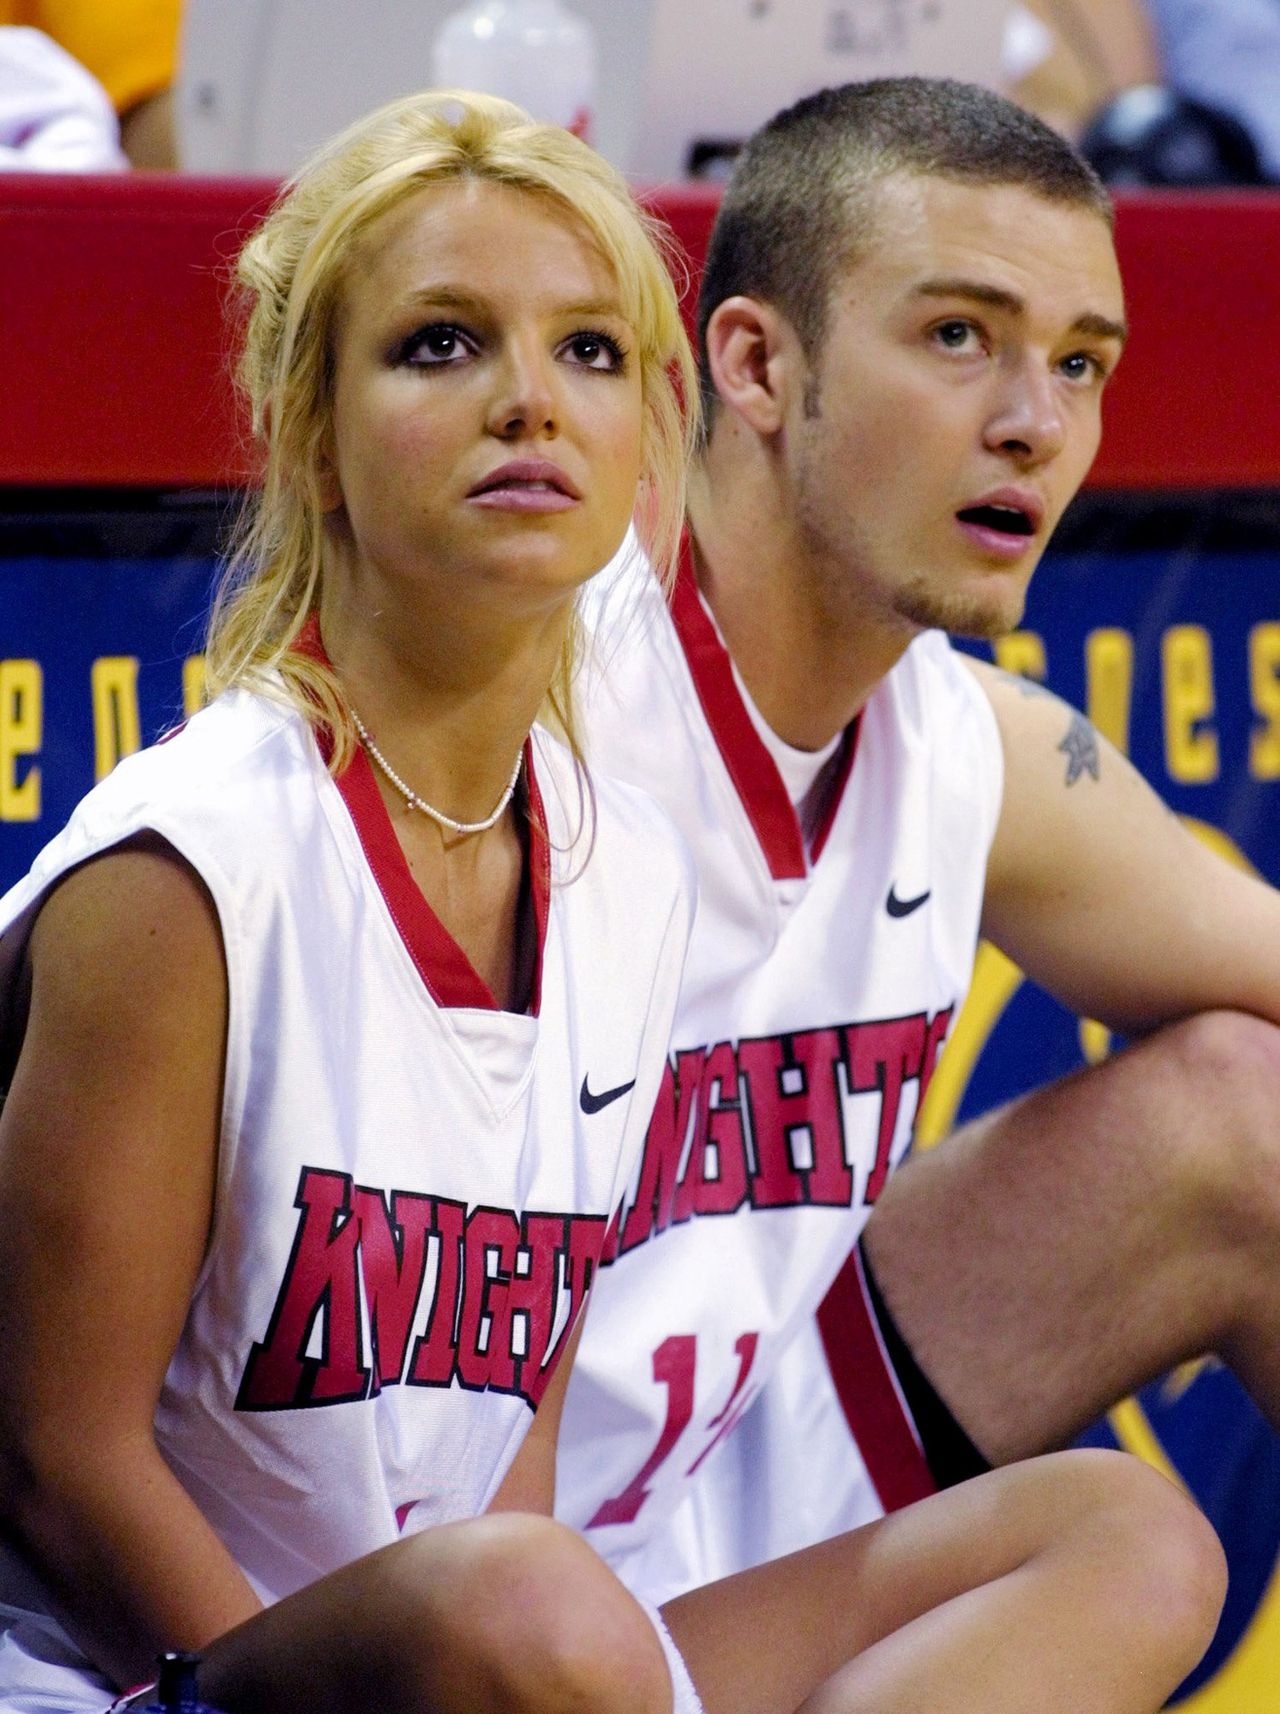 Britney Spears on the behind the scenes of breaking up with Justin Timberlake